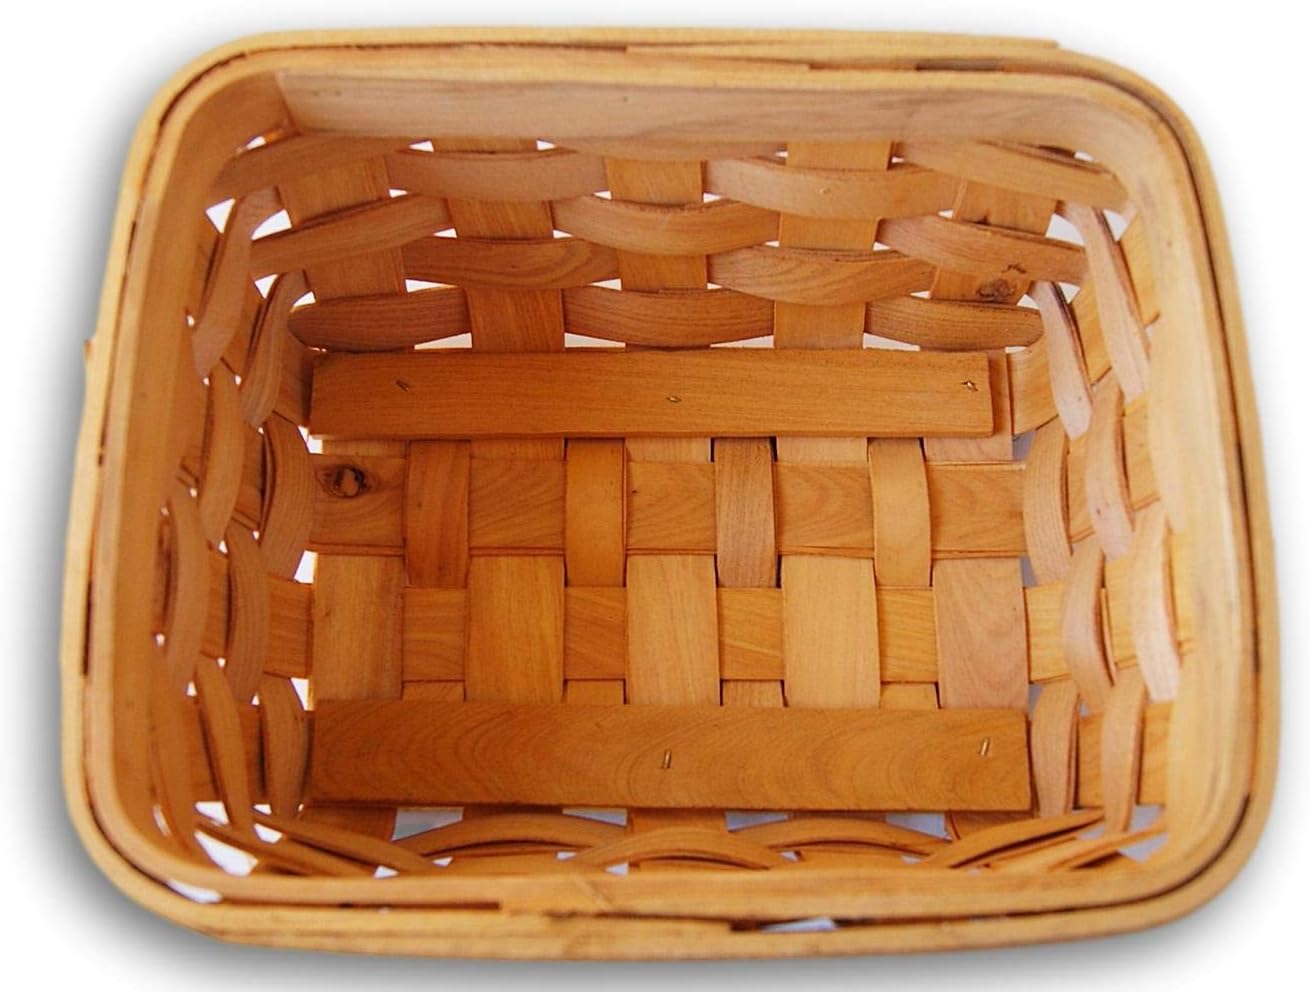 Jumping Daisy Wood Bread Basket - Sturdy Woven Small Rectangular Basket - 7.5 Inches